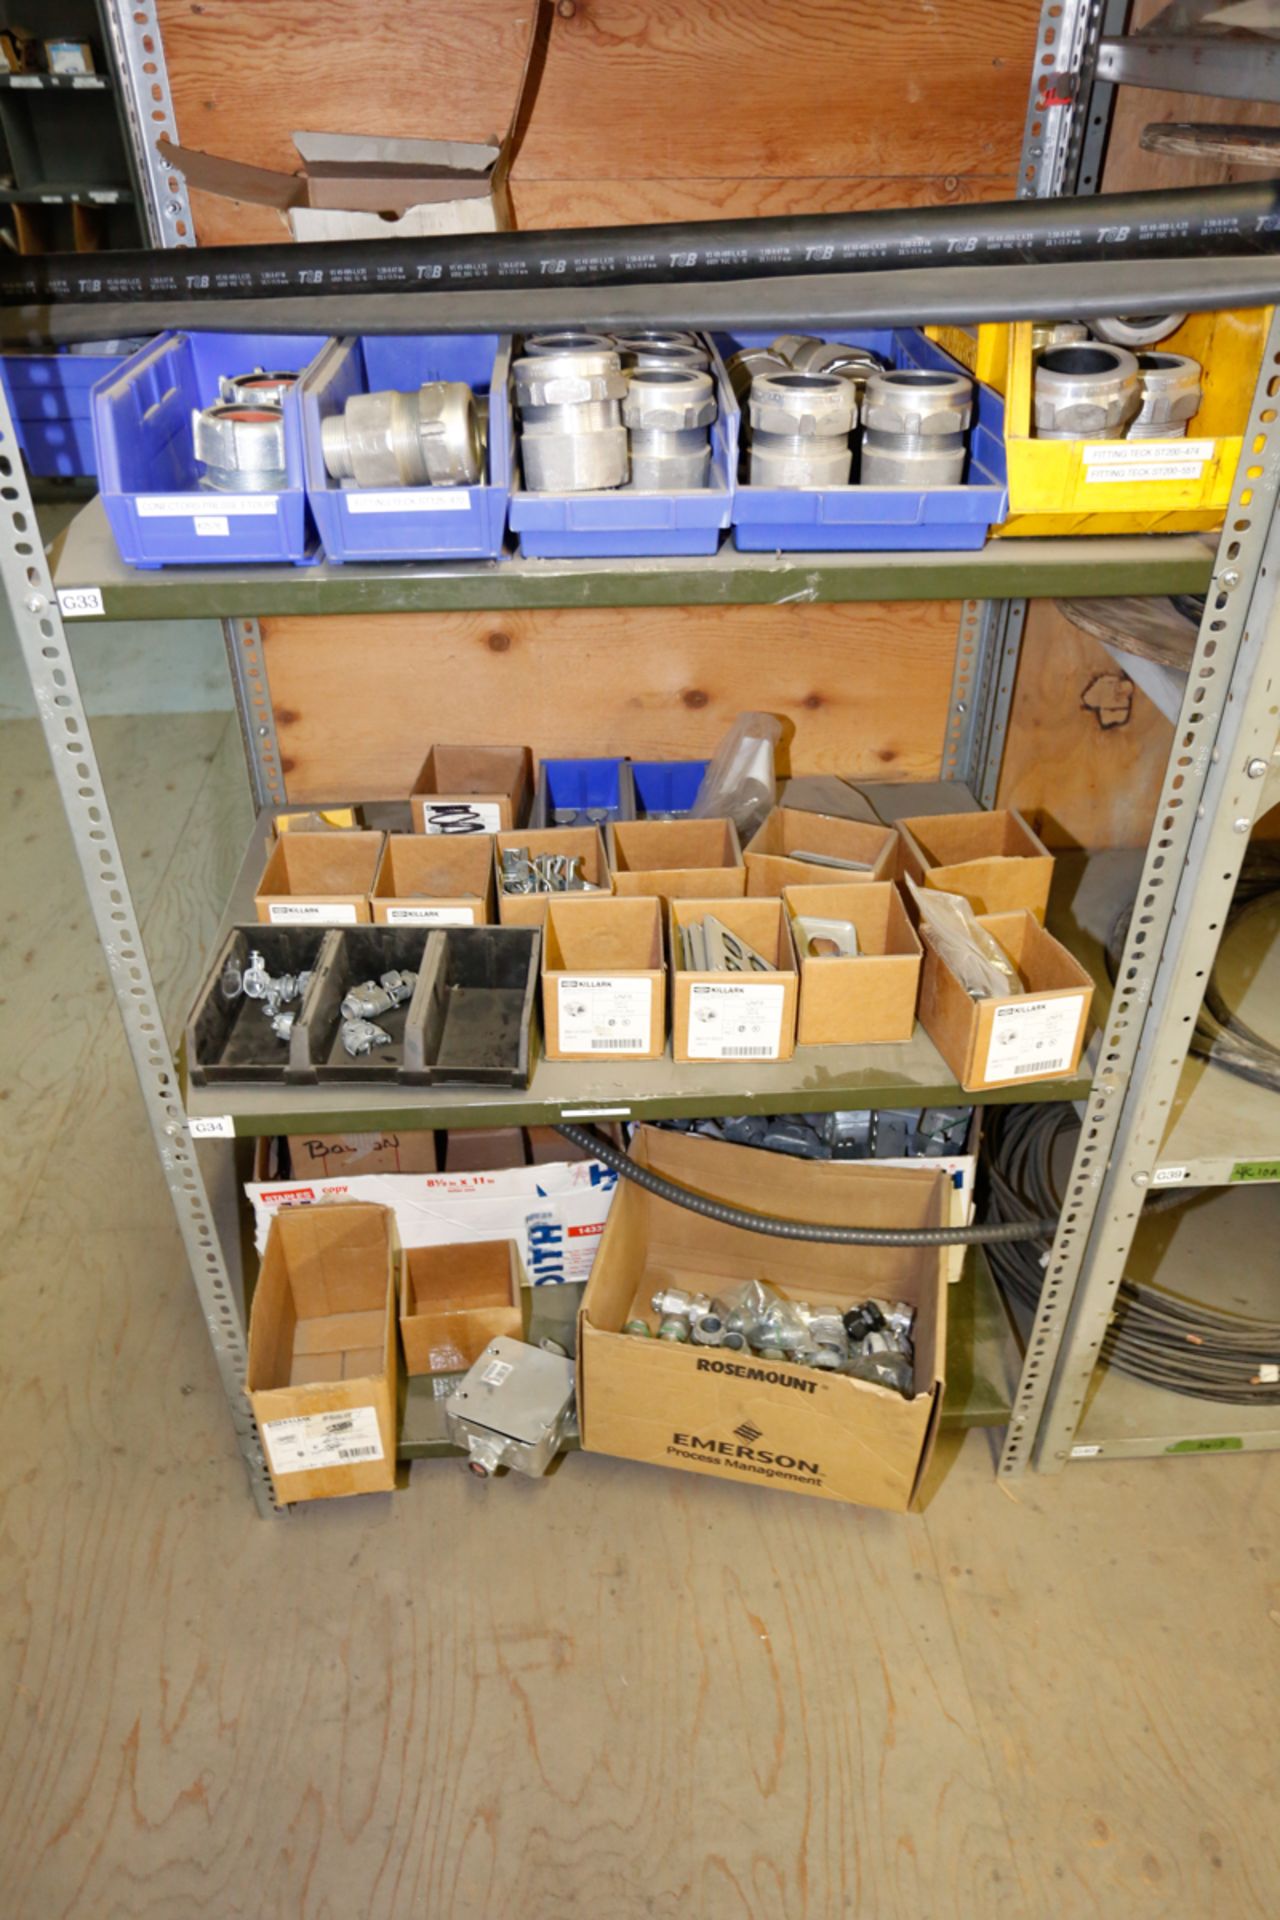 LOT OF ASSORTED ELECTRICAL COMPONENTS: CONNECTORS, WIRE, ETC, +/- 60 SPOOLS OF WIRE - Image 3 of 9